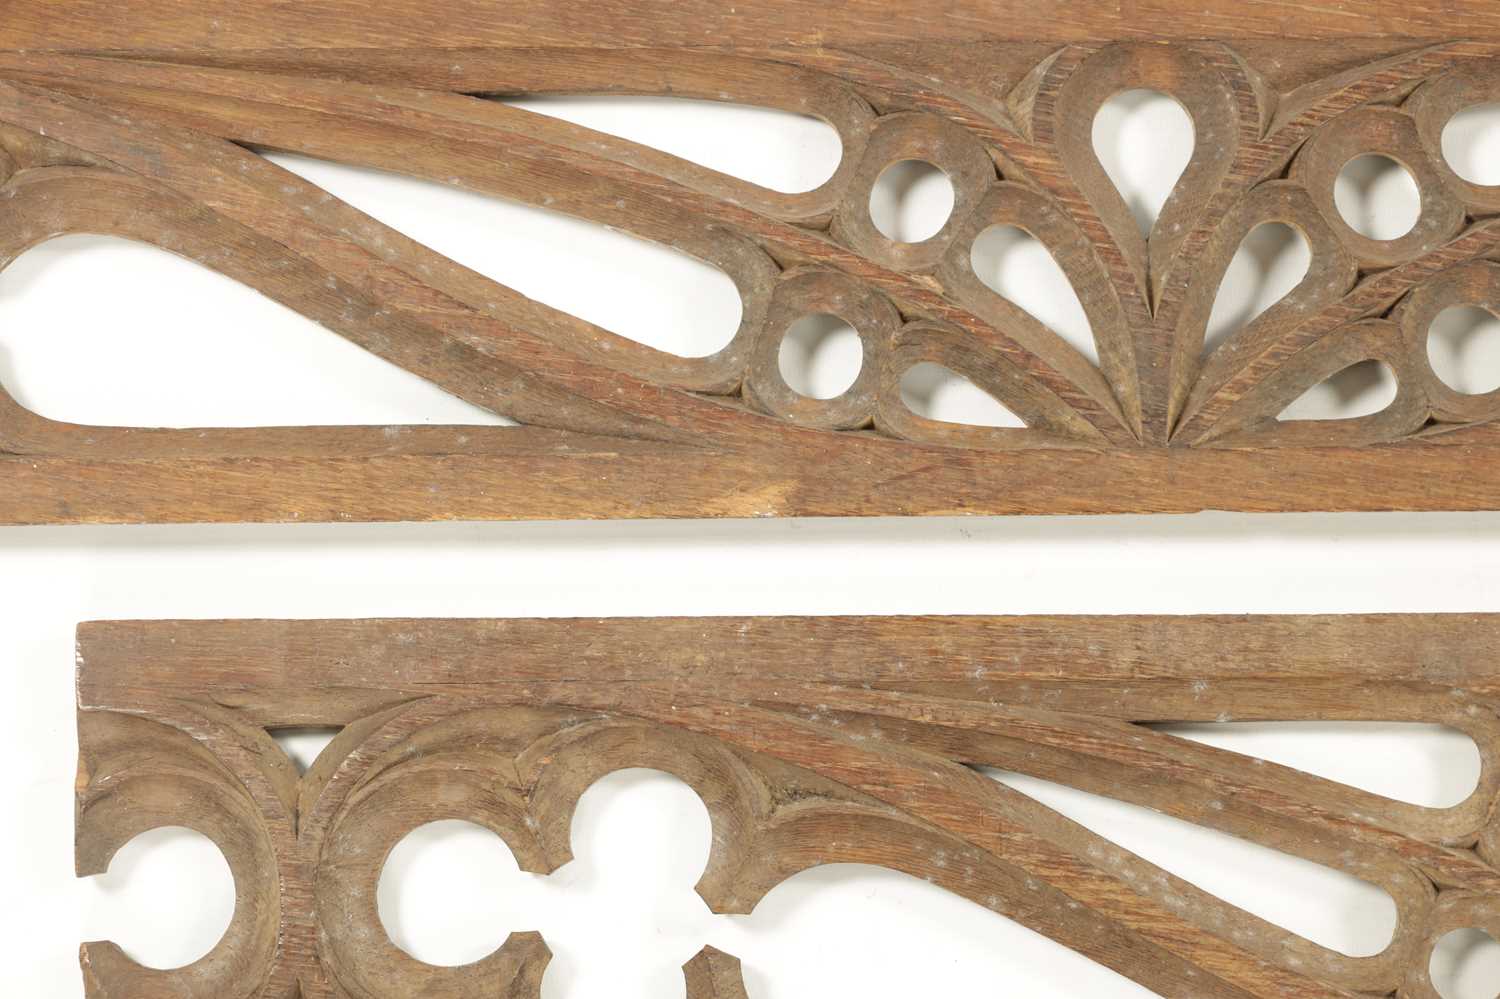 TWO PIECES OF CARVED OAK GOTHIC TRELIS WORK - Image 5 of 5